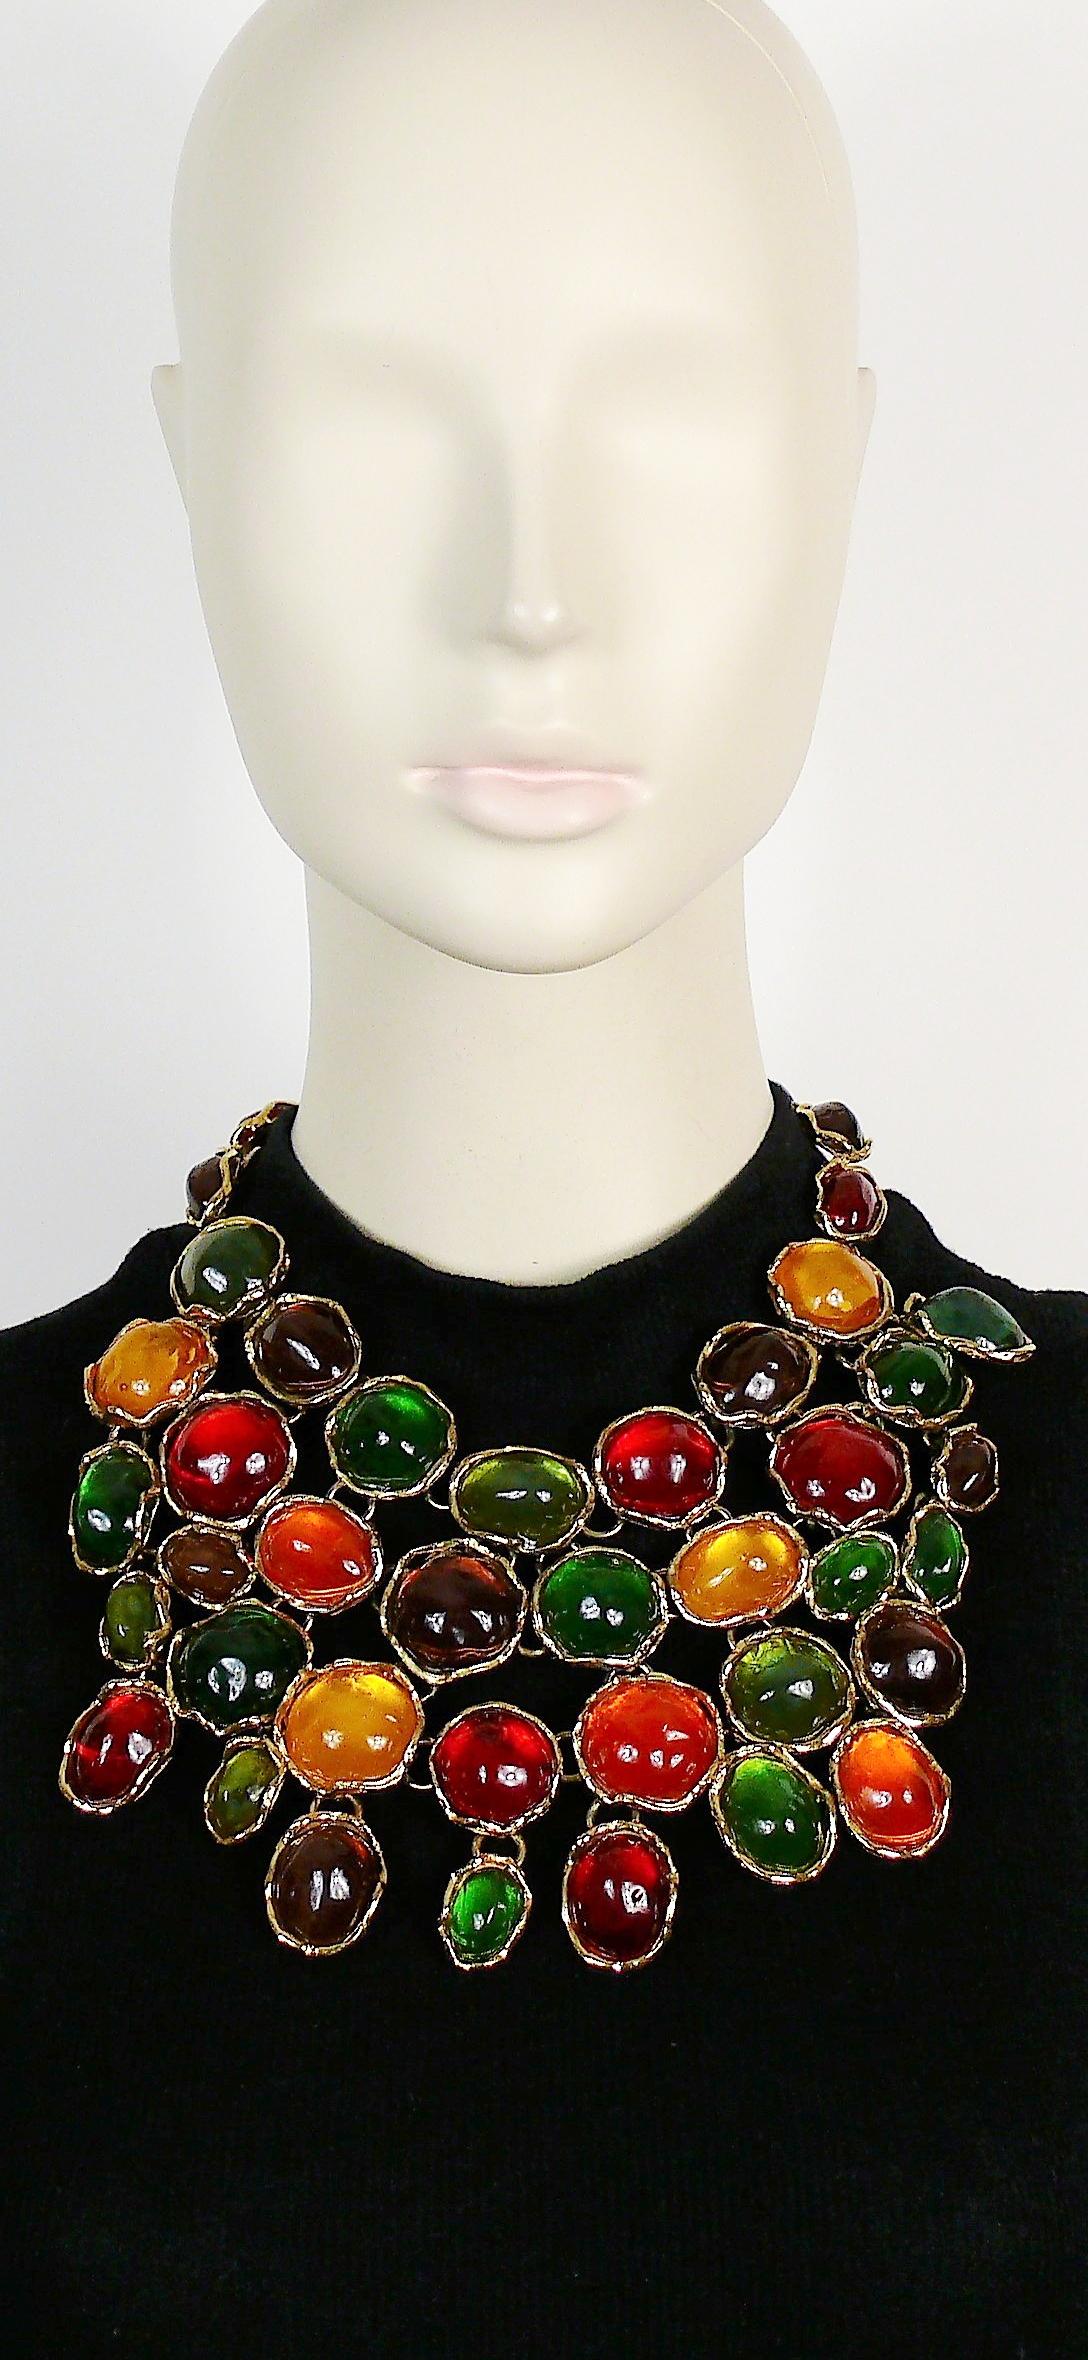 YVES SAINT LAURENT vintage rare dramatic multi jewelled plastron necklace featuring vibrant multi colour poured resin cabochons in a gold toned setting.

Spring/Summer 1989 Collection, as seen on the YVES SAINT LAURENT Fashion Show.

One of the most